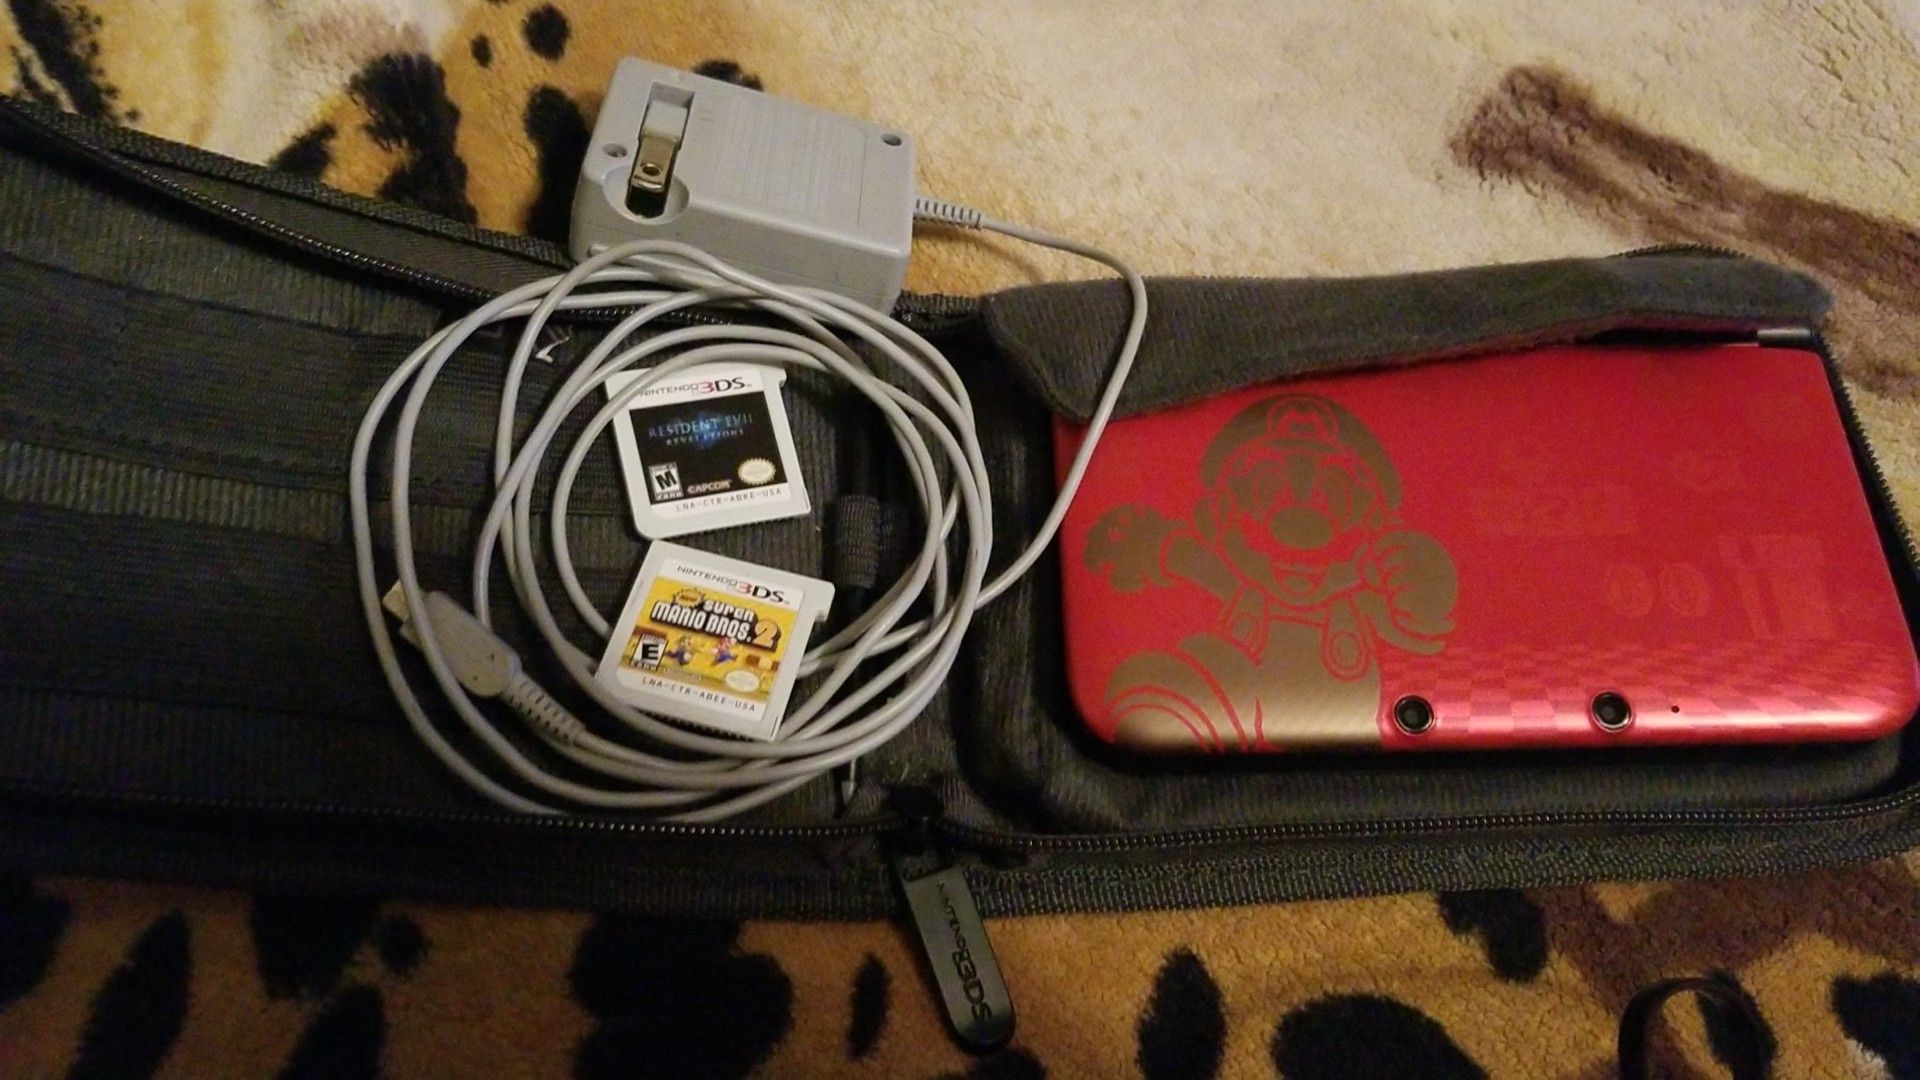 Nintendo 3DS XL with two games and case